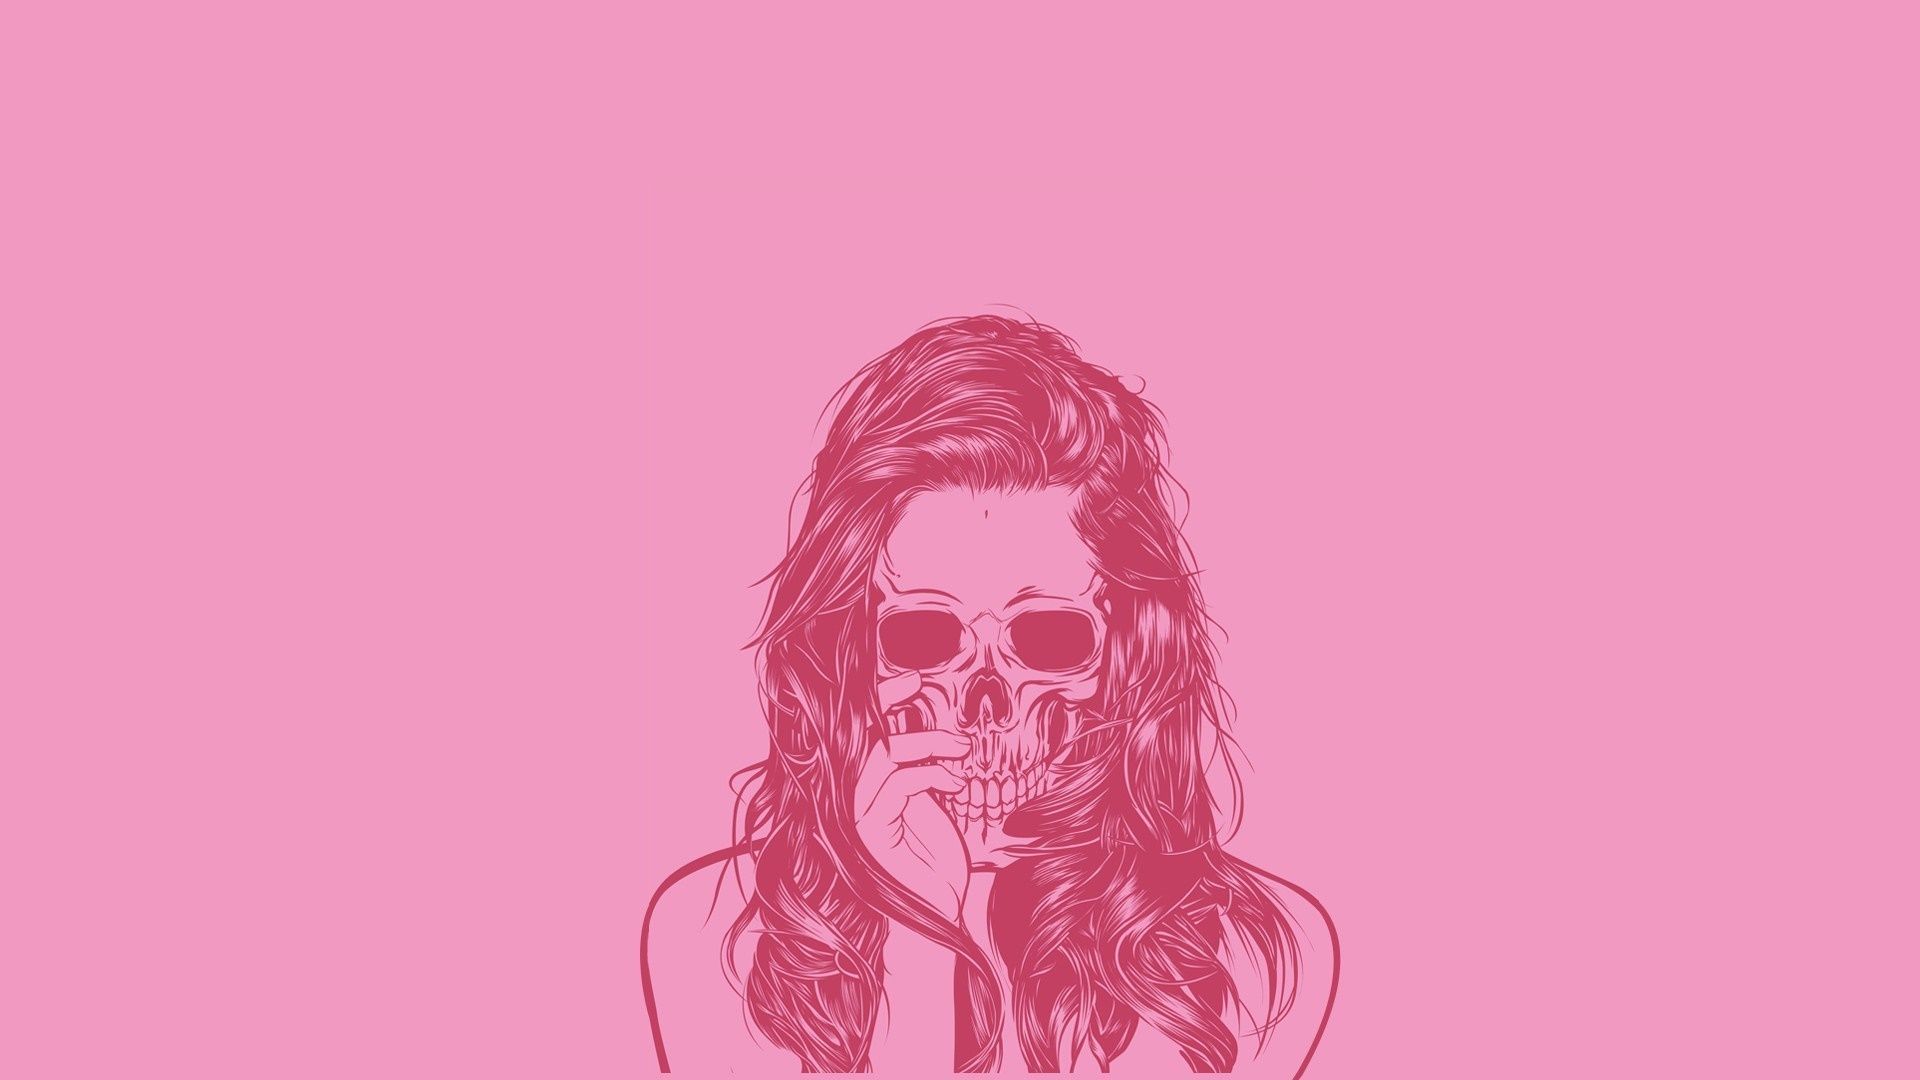 A woman with long hair and sunglasses holding a skull in front of her face. - Magenta